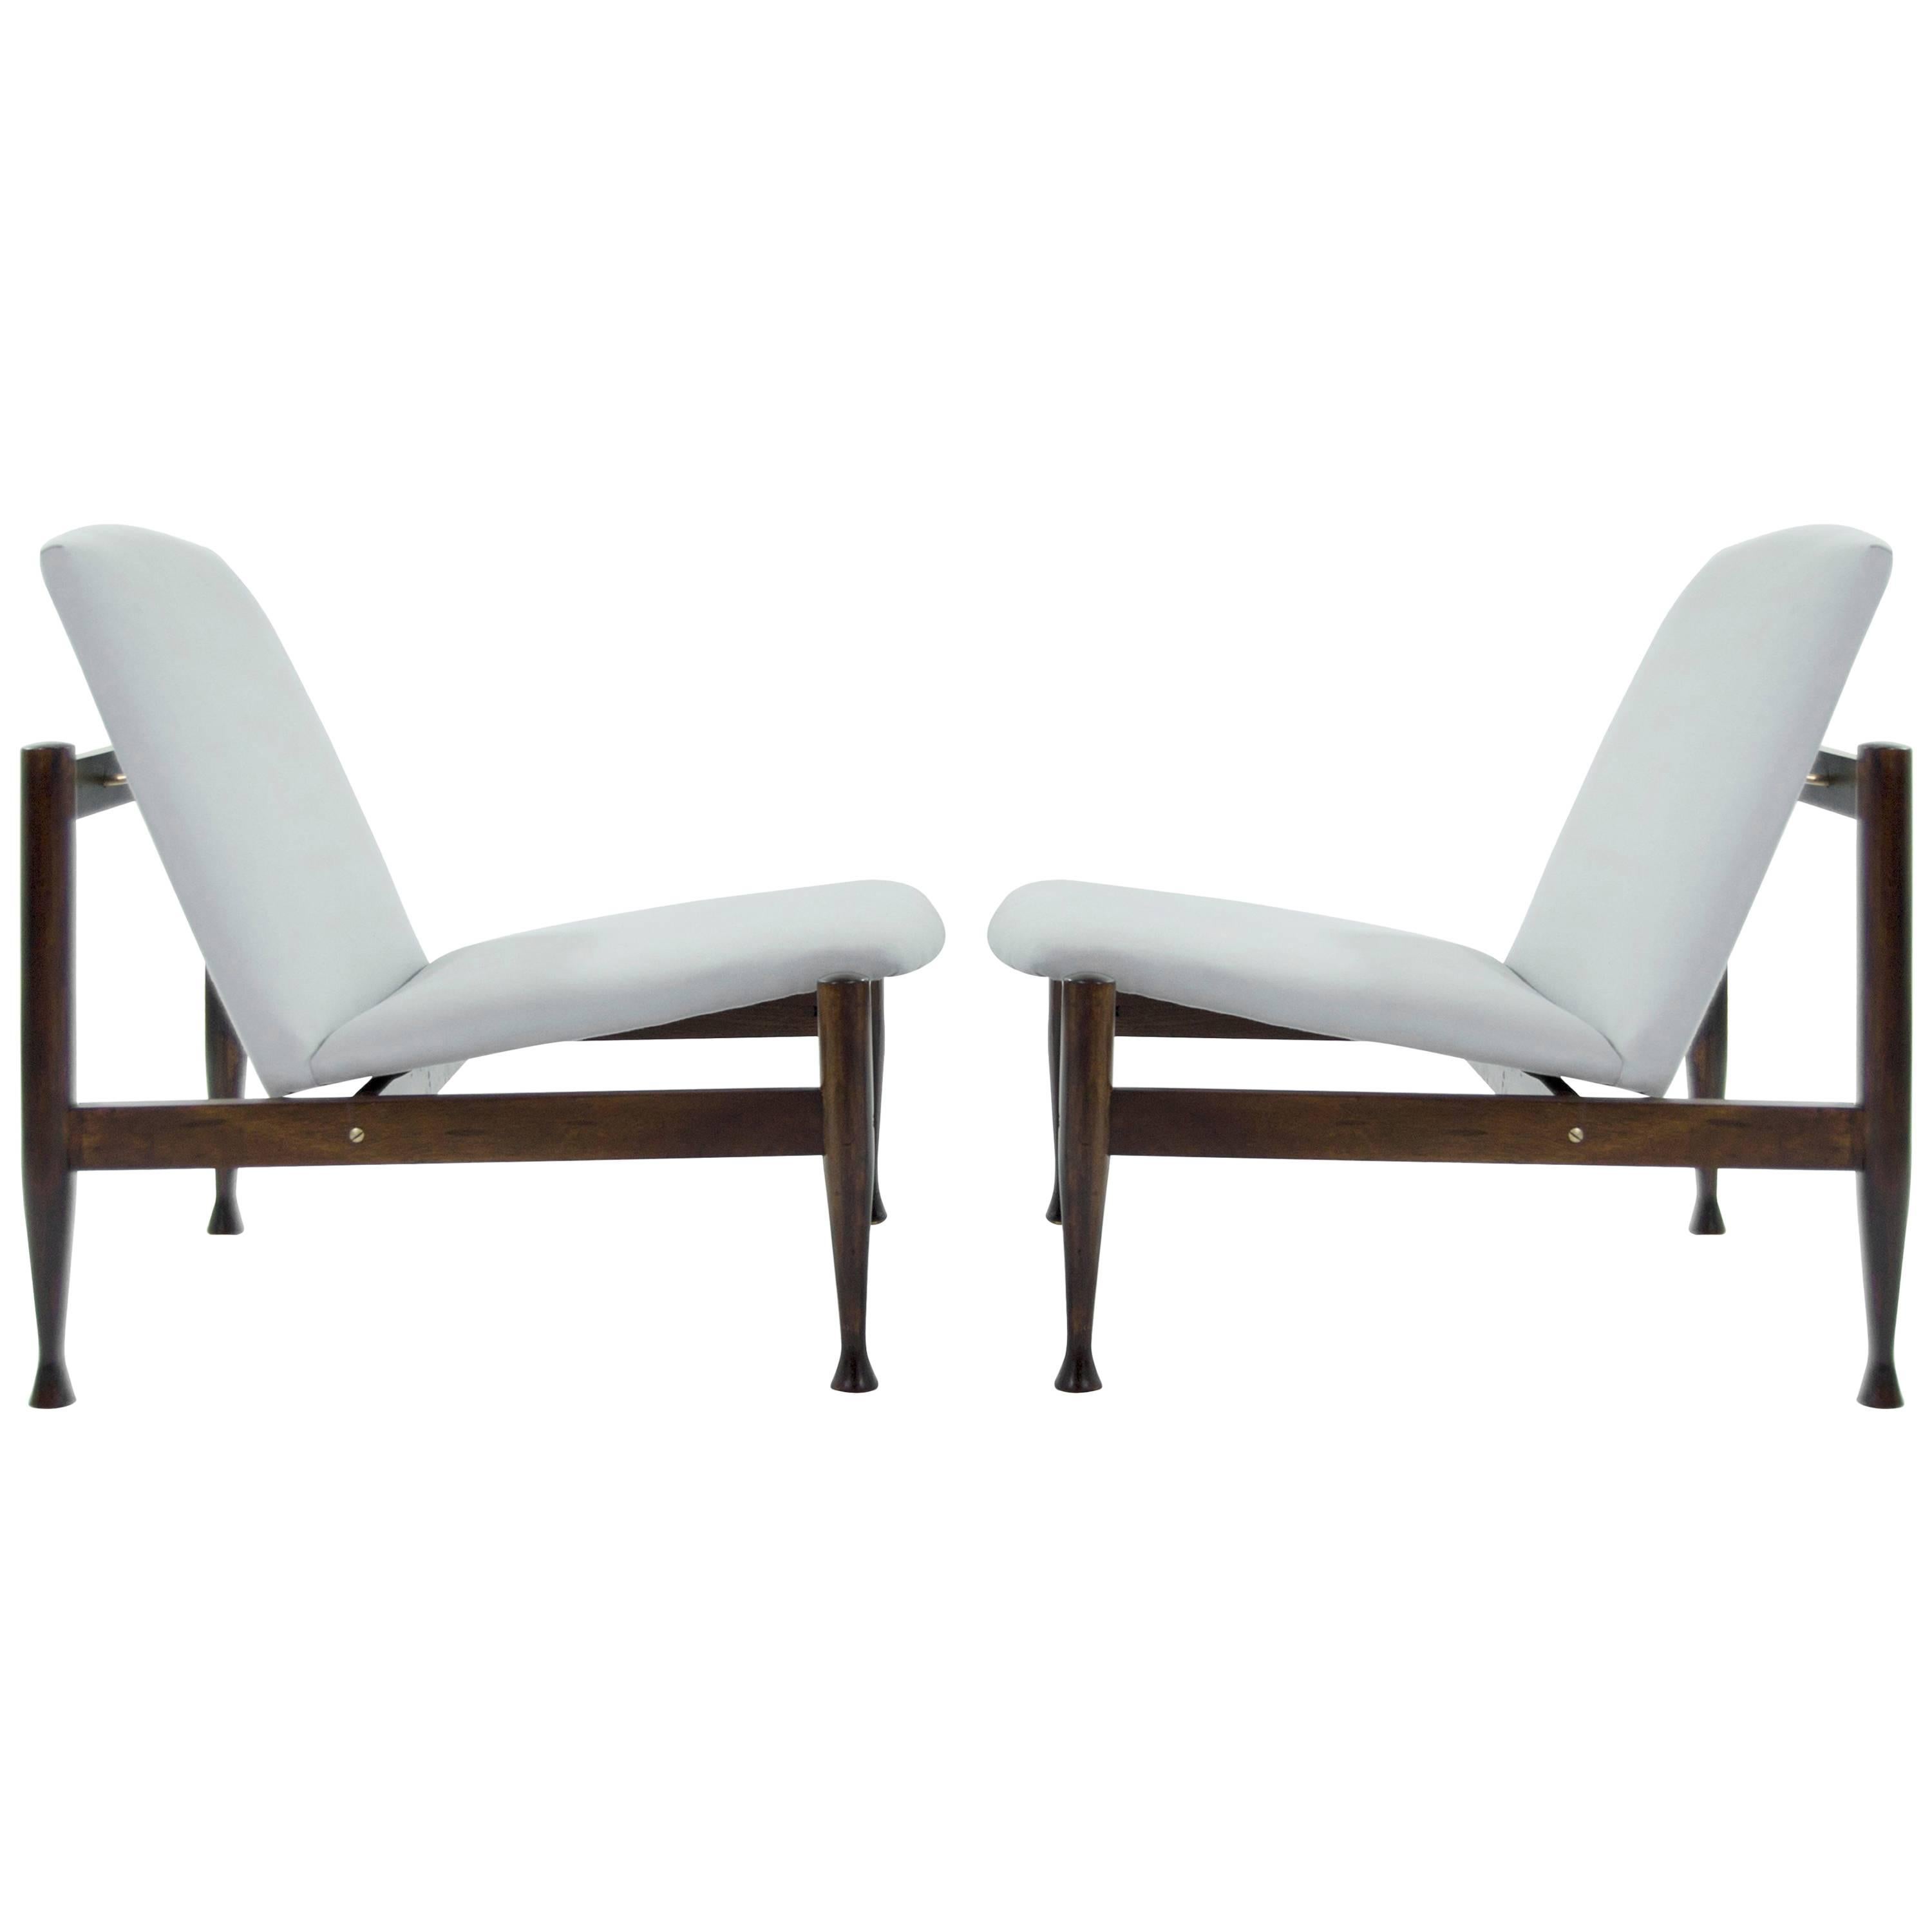 A fantastic pair of Danish Modern lounge chairs in the style of Finn Juhl (Japan Chairs). Newly upholstered in a light blue linen. Walnut frames fully restored, brass newly polished.